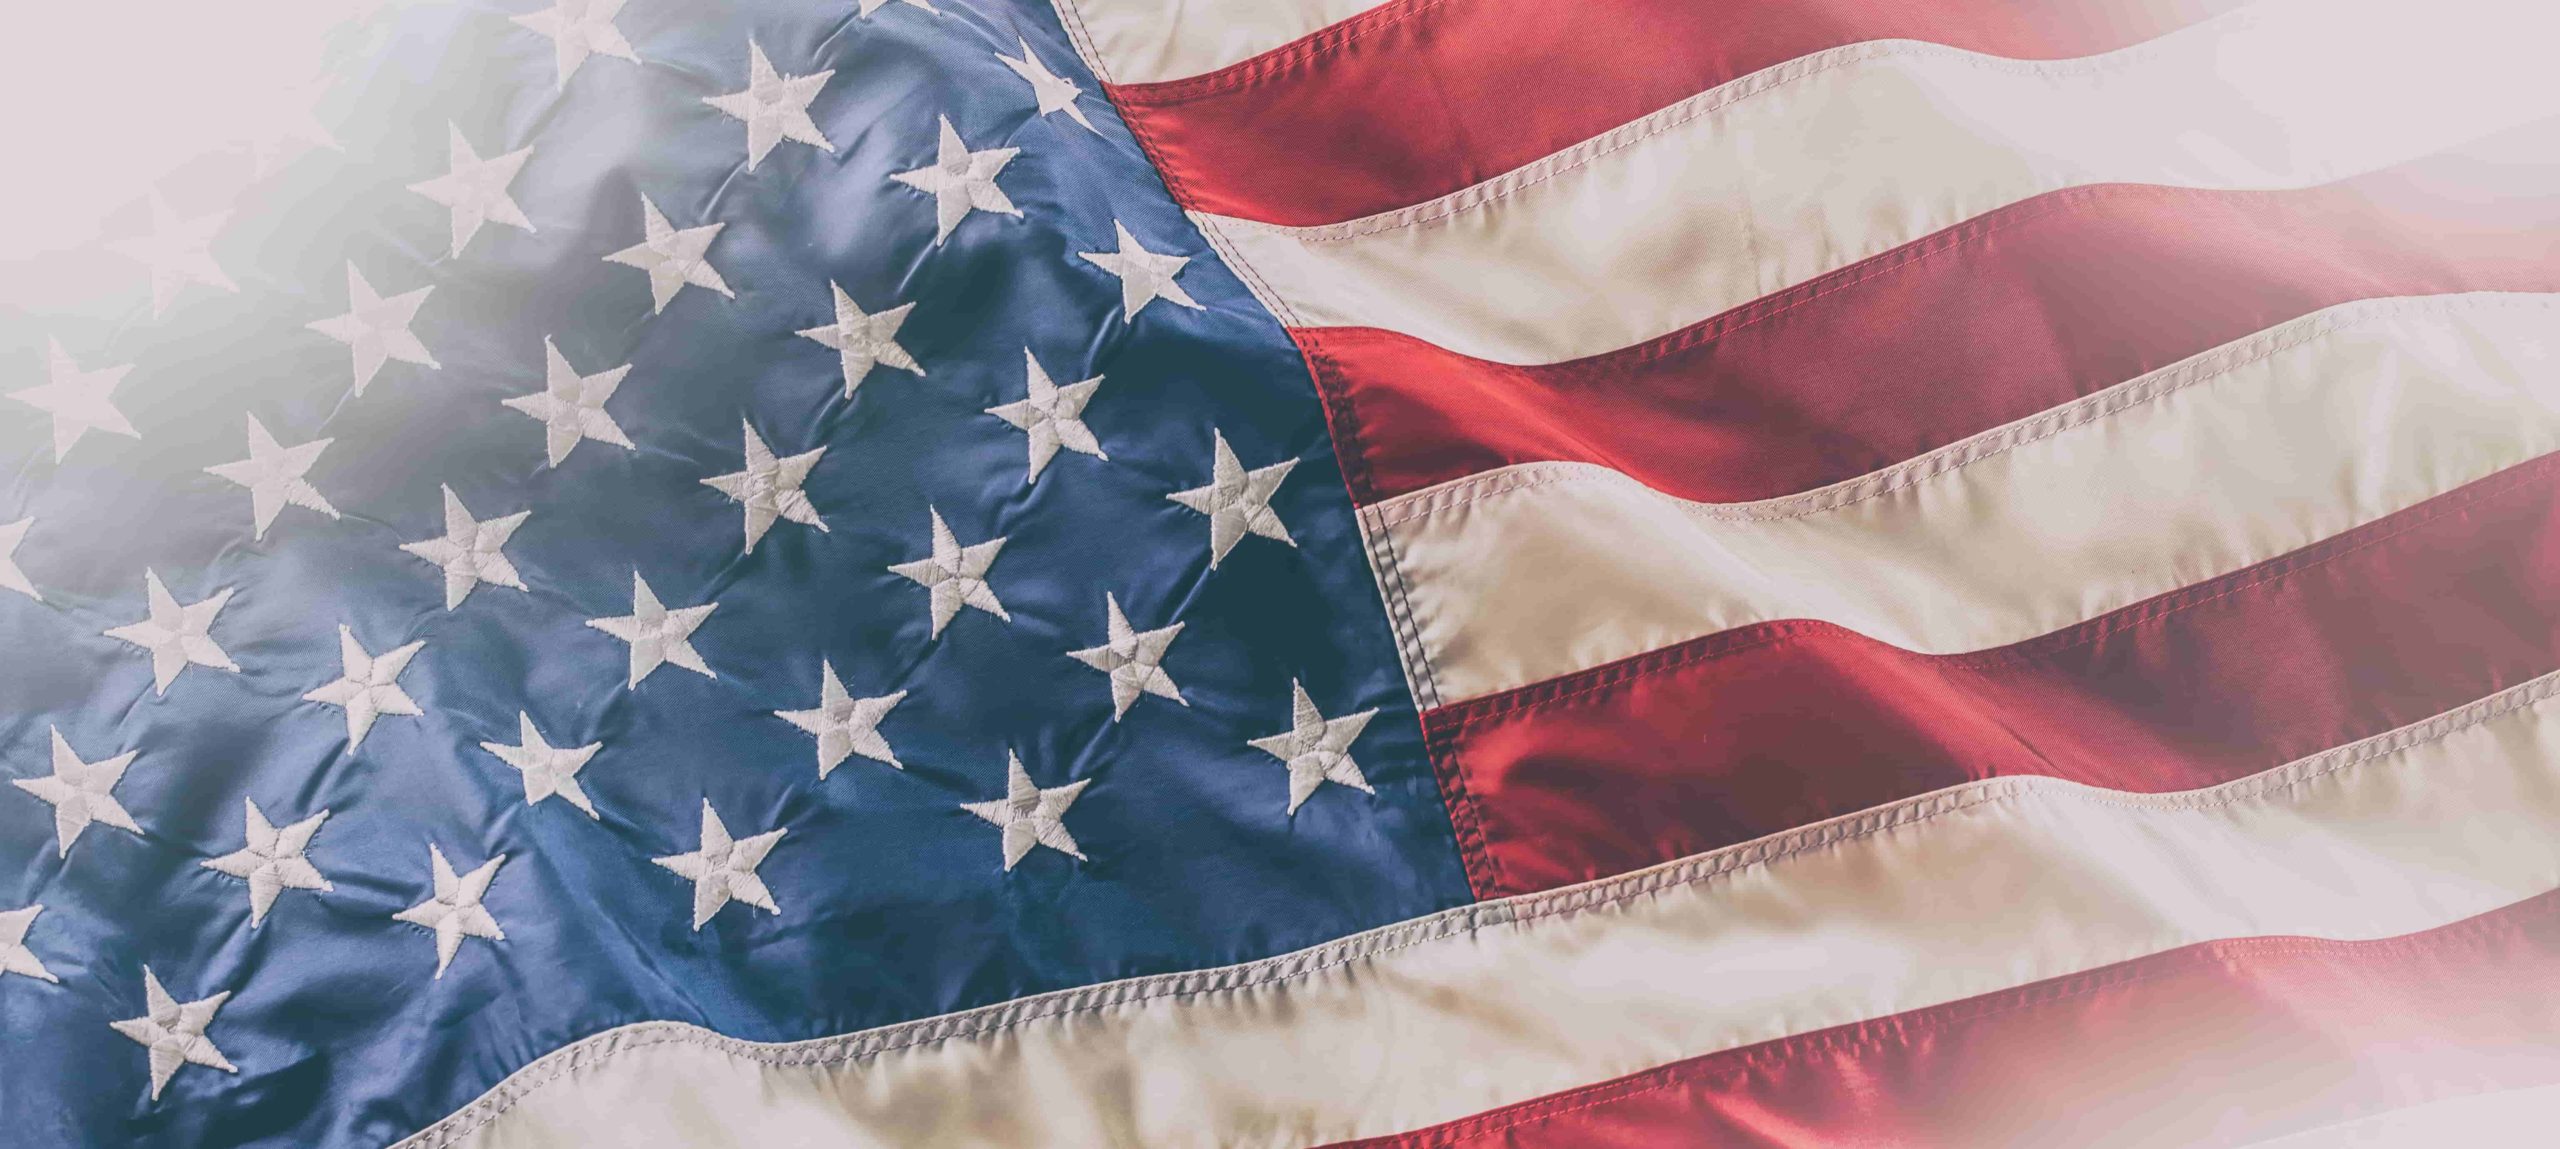 the history of the american flag is a long and storied one